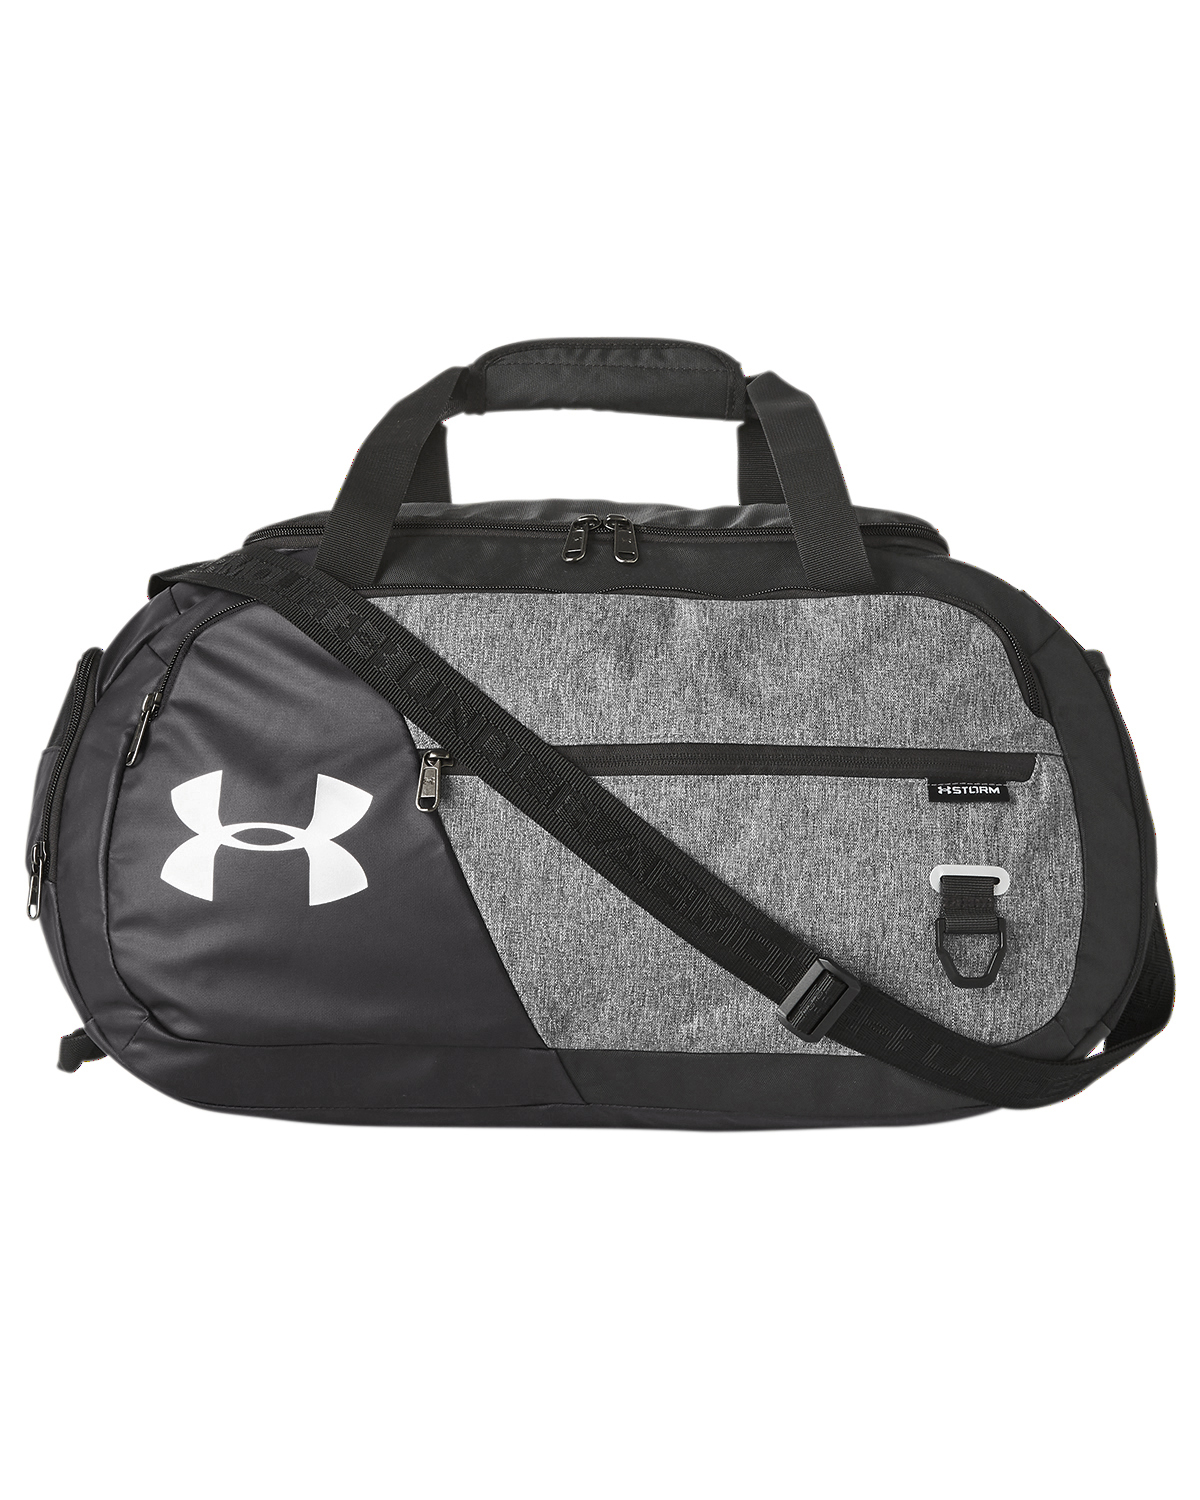 Under Armour Undeniable Small Duffle